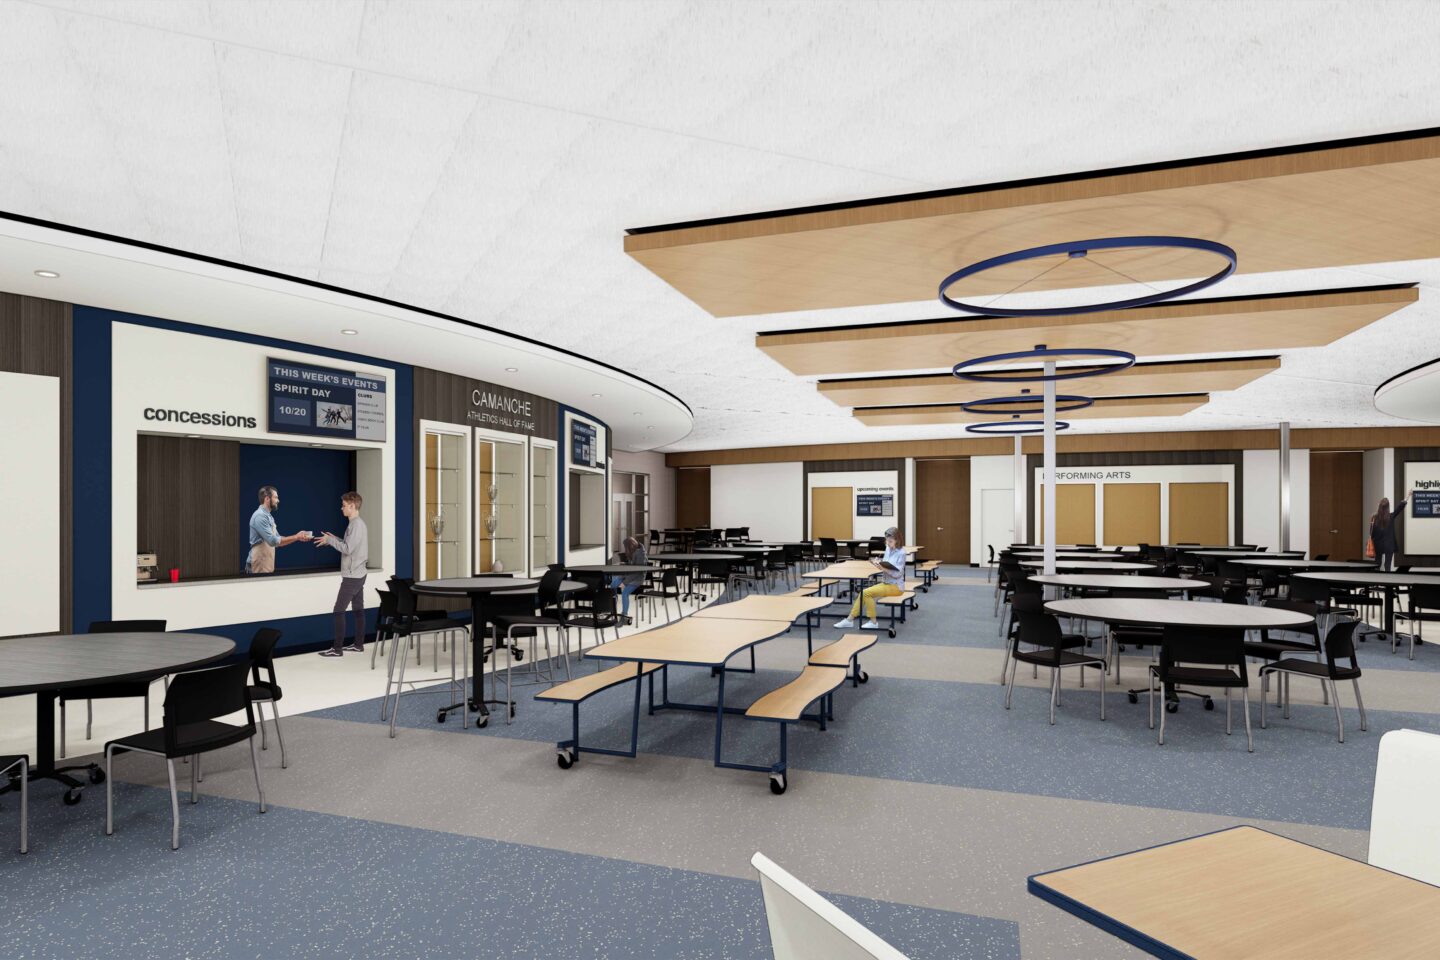 A rendering of the high school commons area featuring a curved wall with display cases